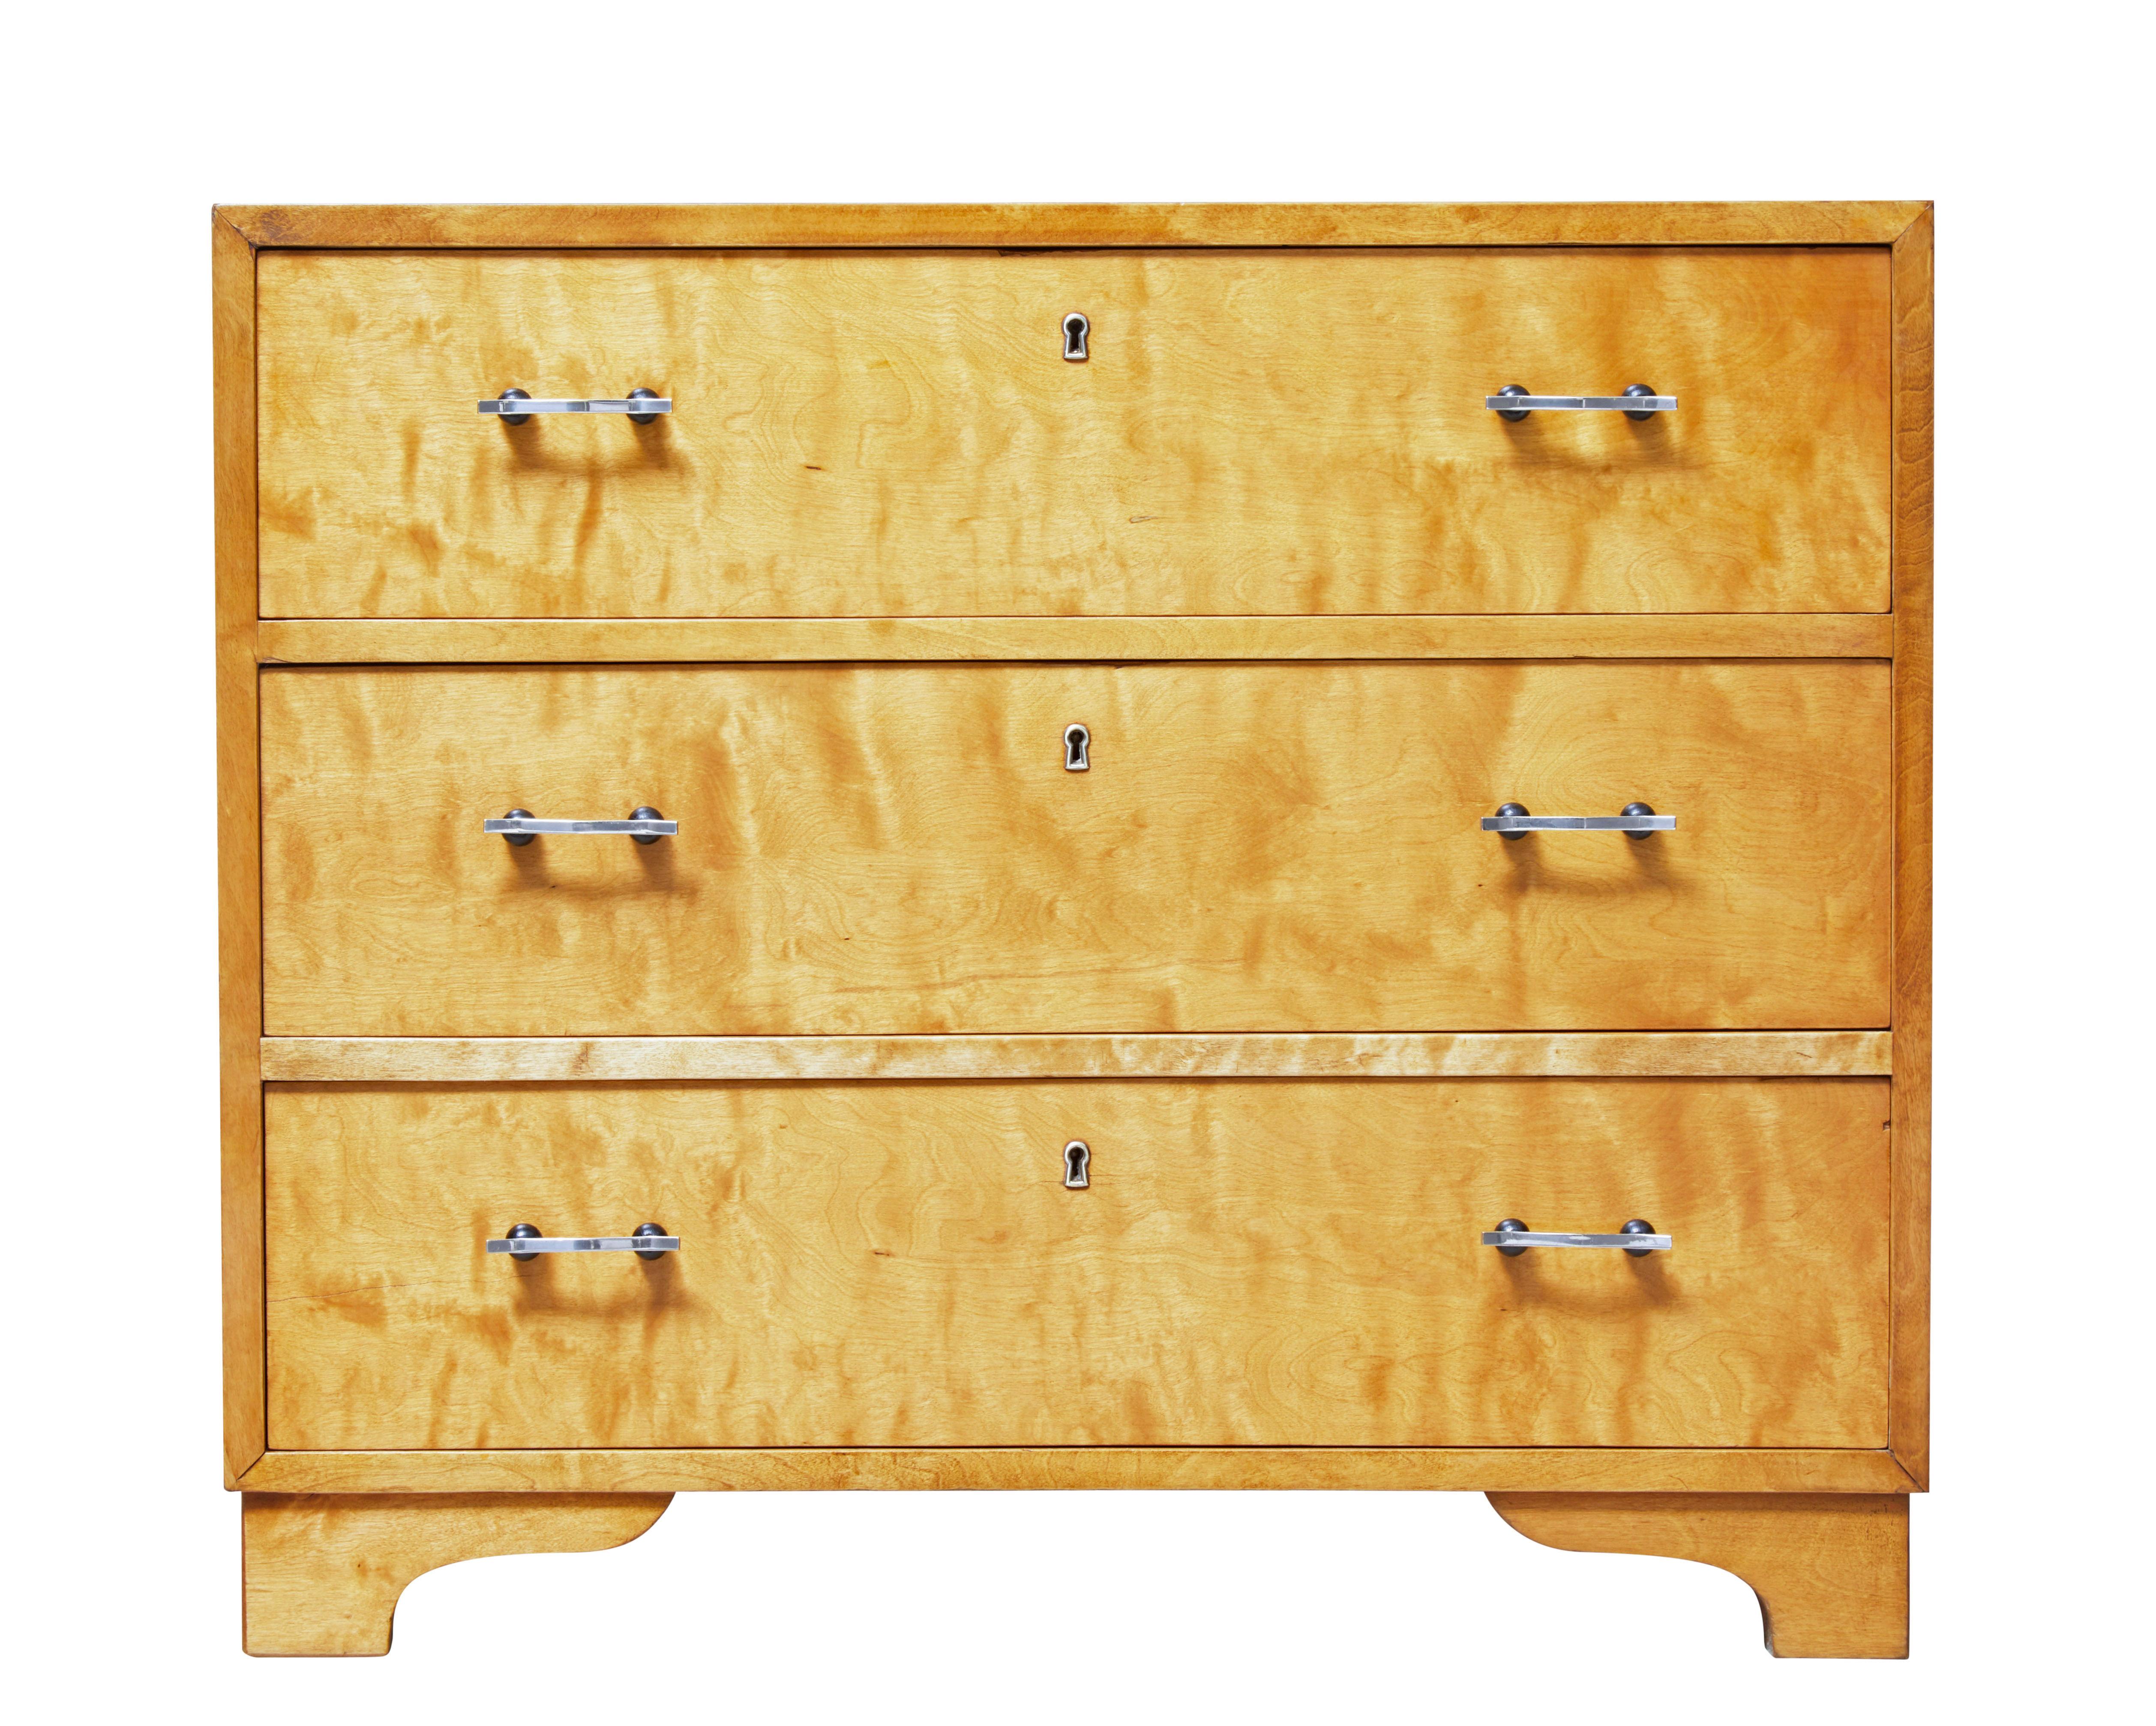 Good quality swedish chest of drawers circa 1950.

3 drawers of equal proportion fitted with shaped steel handles and key plates. Rich golden colour.

Standing on bracket feet.

Ideal for use in multiple rooms around the home.

Recently restored